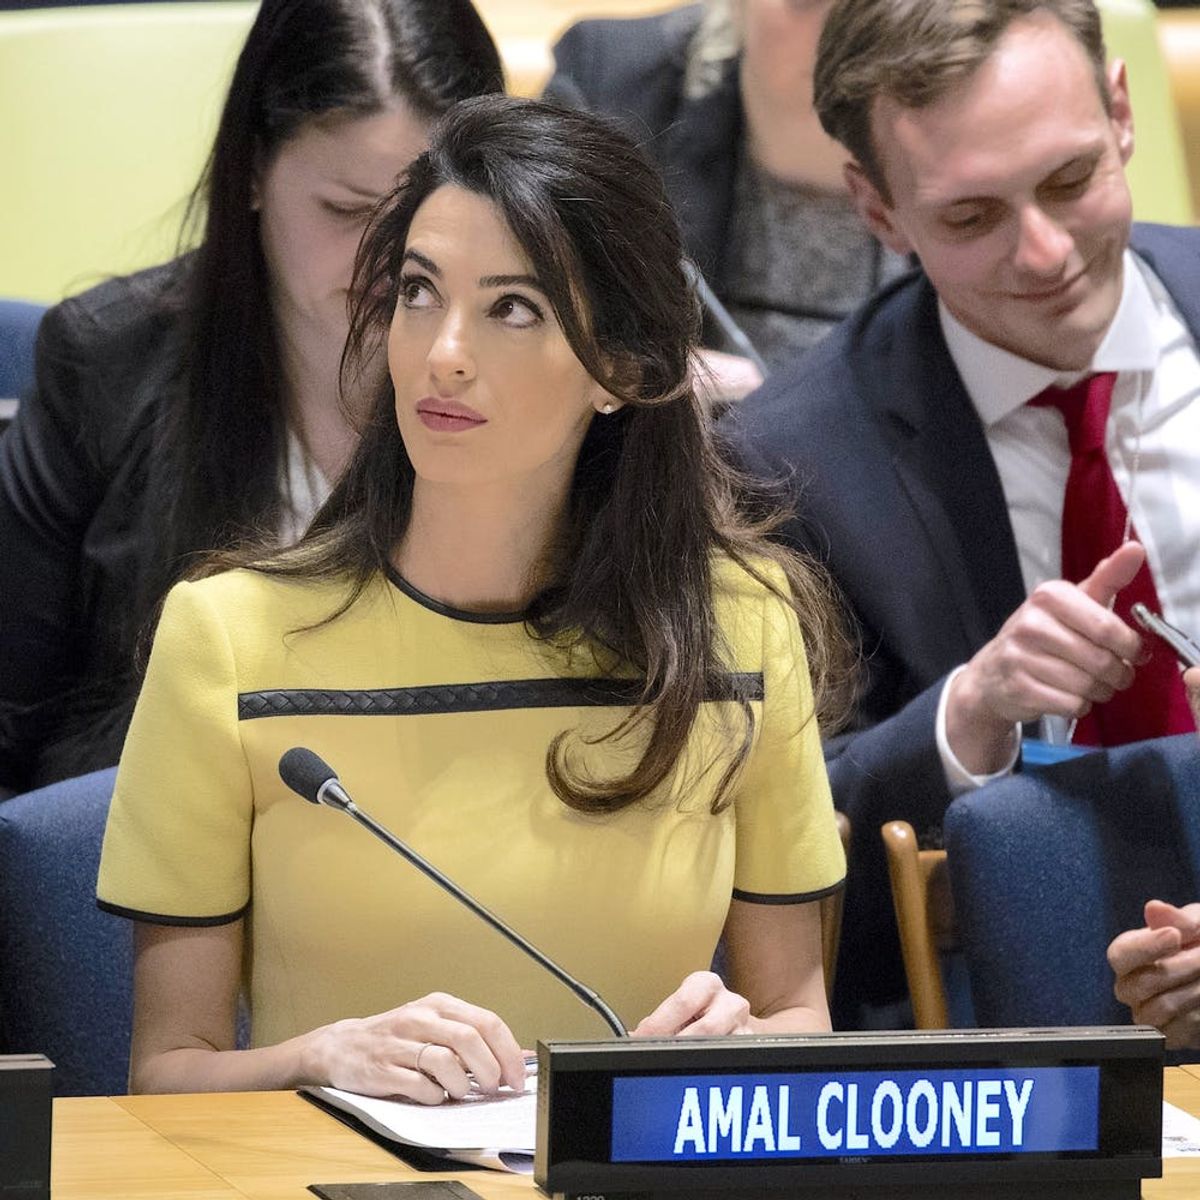 Amal Clooney’s High-Fashion Maternity Style *Almost* Outshines Powerful UN Speech